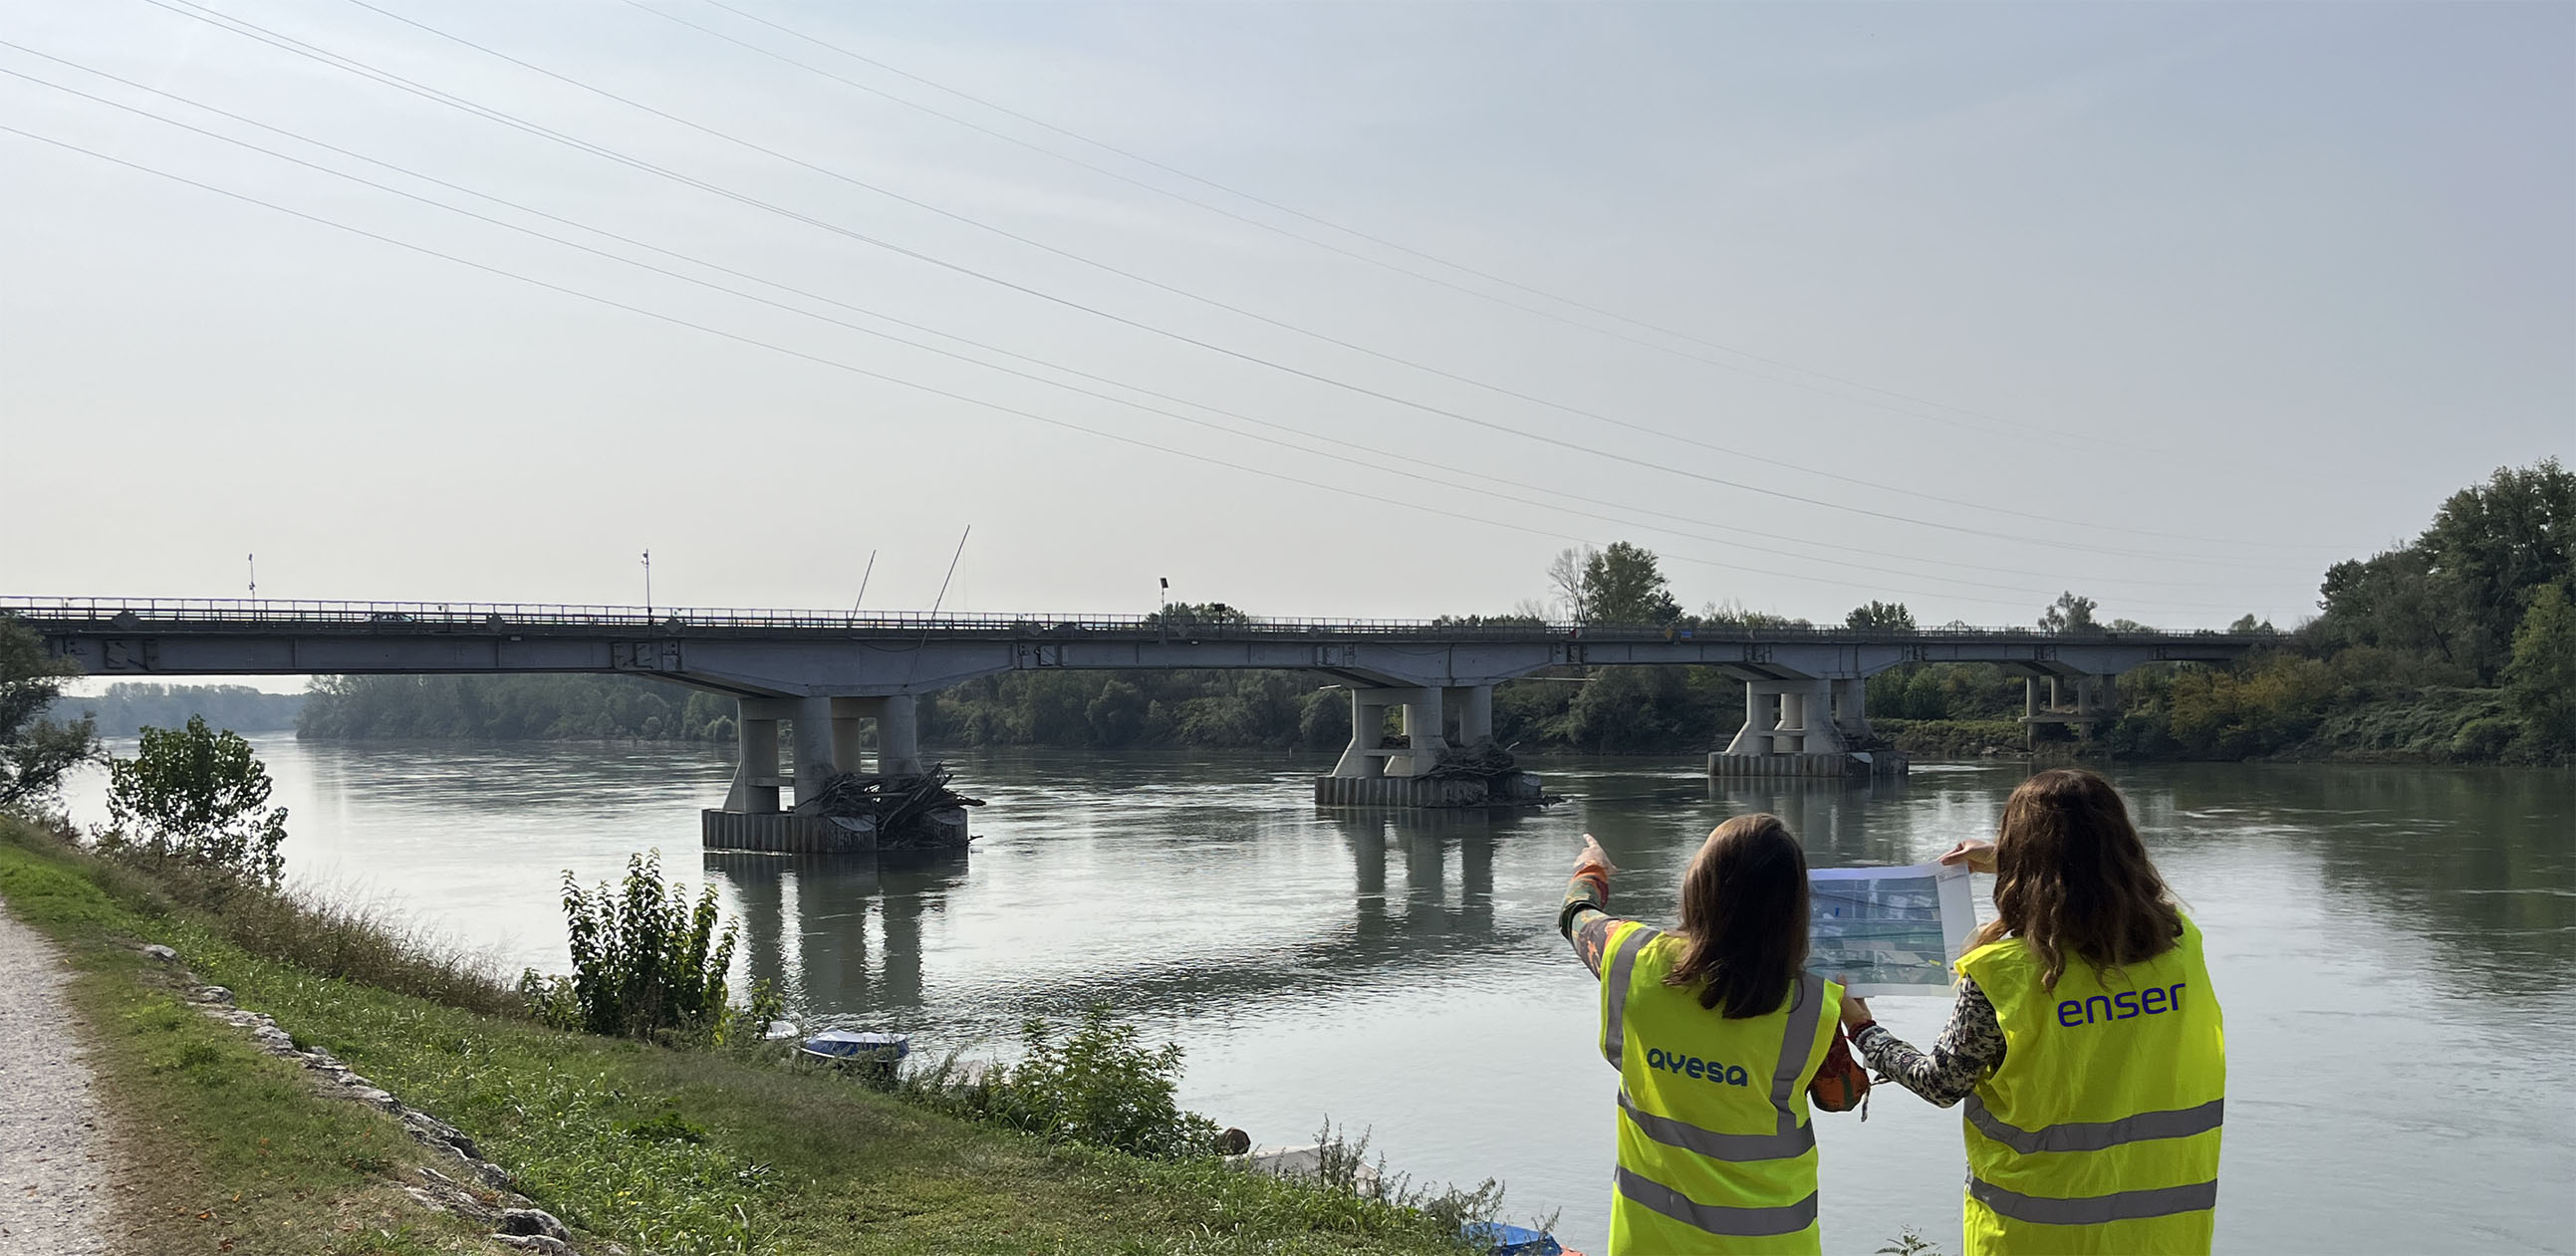 Ayesa Secures First Engineering Contract in Italy for New Parma Bridge